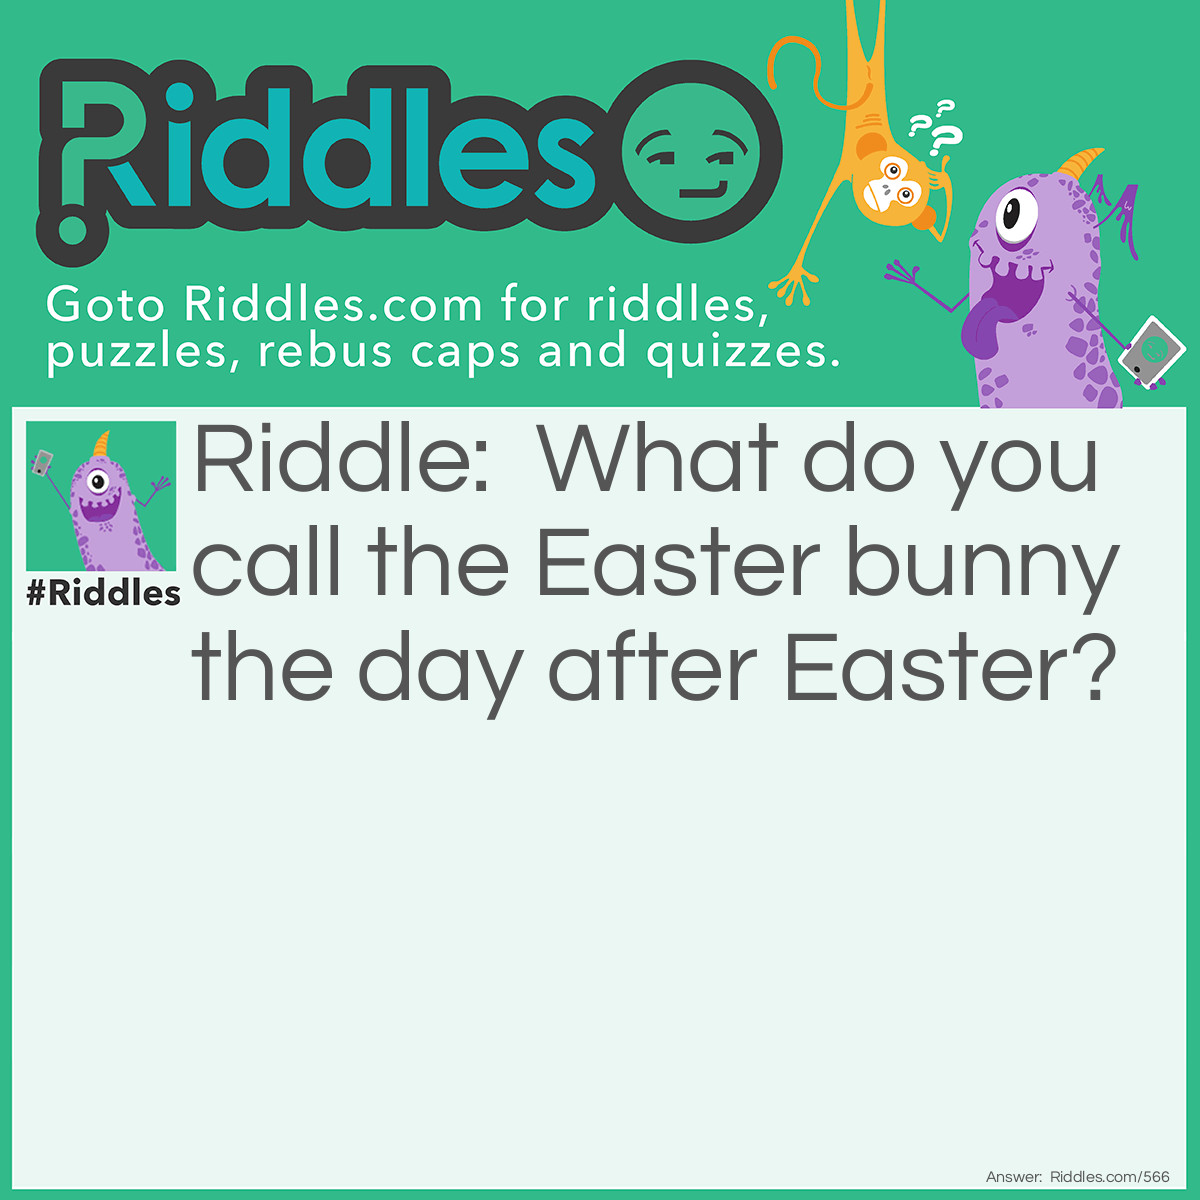 Riddle: What do you call the Easter bunny the day after <a href="https://www.riddles.com/quiz/easter-riddles">Easter</a>? Answer: Tired!